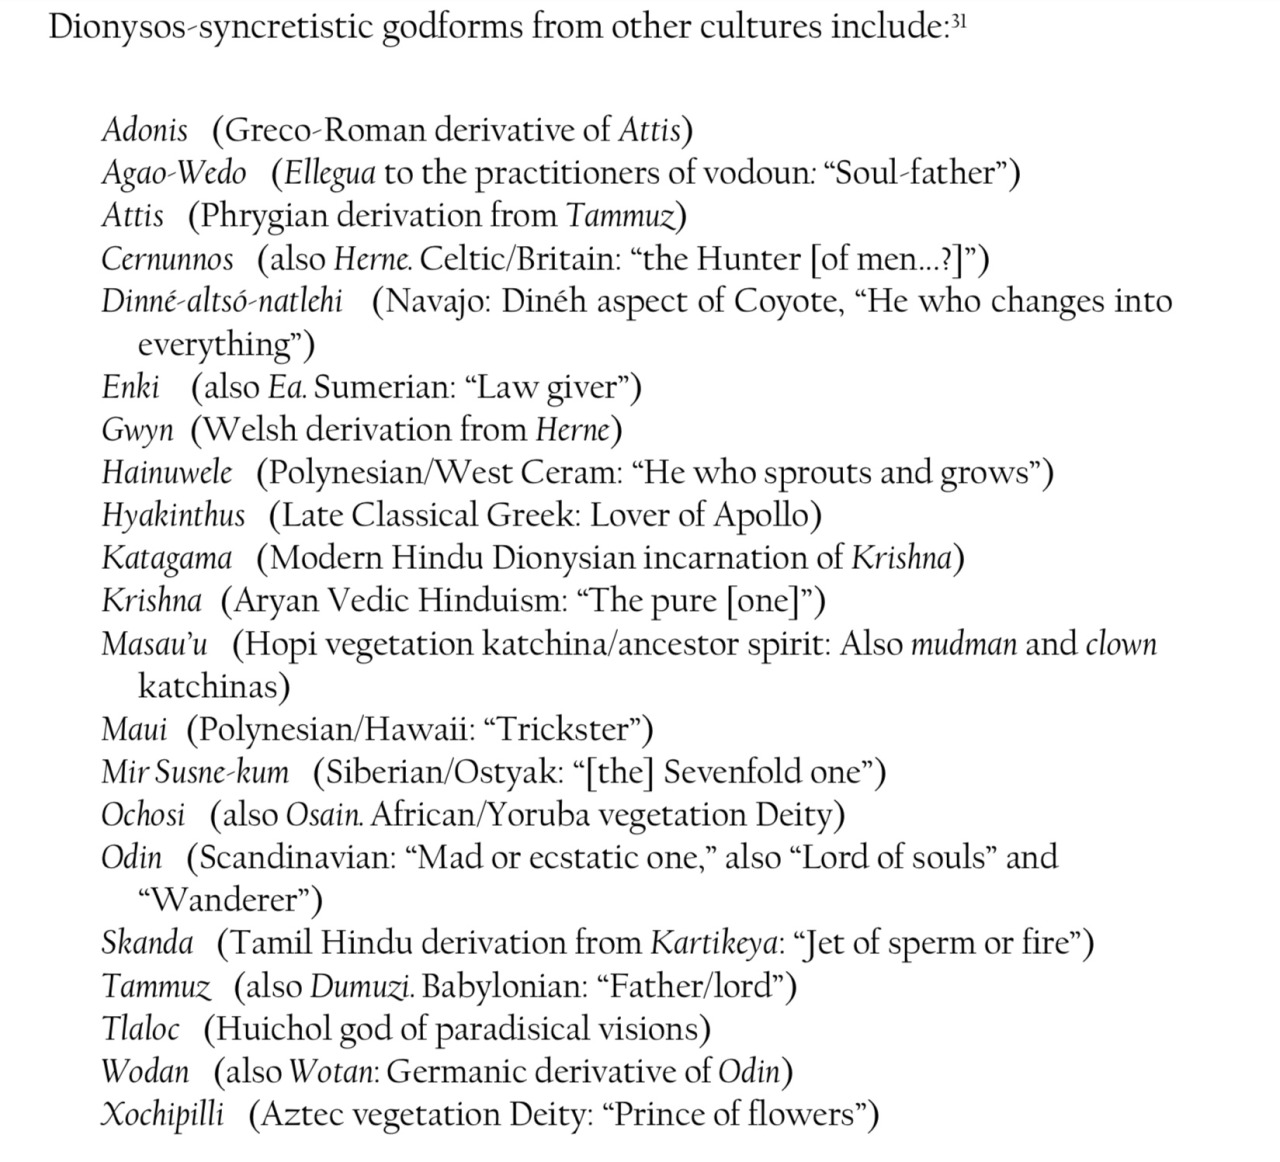 Screenshot of a list from The God Who Comes where Taylor-Perry claims Dionysos is syncretic with various deities, including the Dine Coyote, Hopi Masau'u, Hawaiian Maui, Yoruba Ochosi, and more.